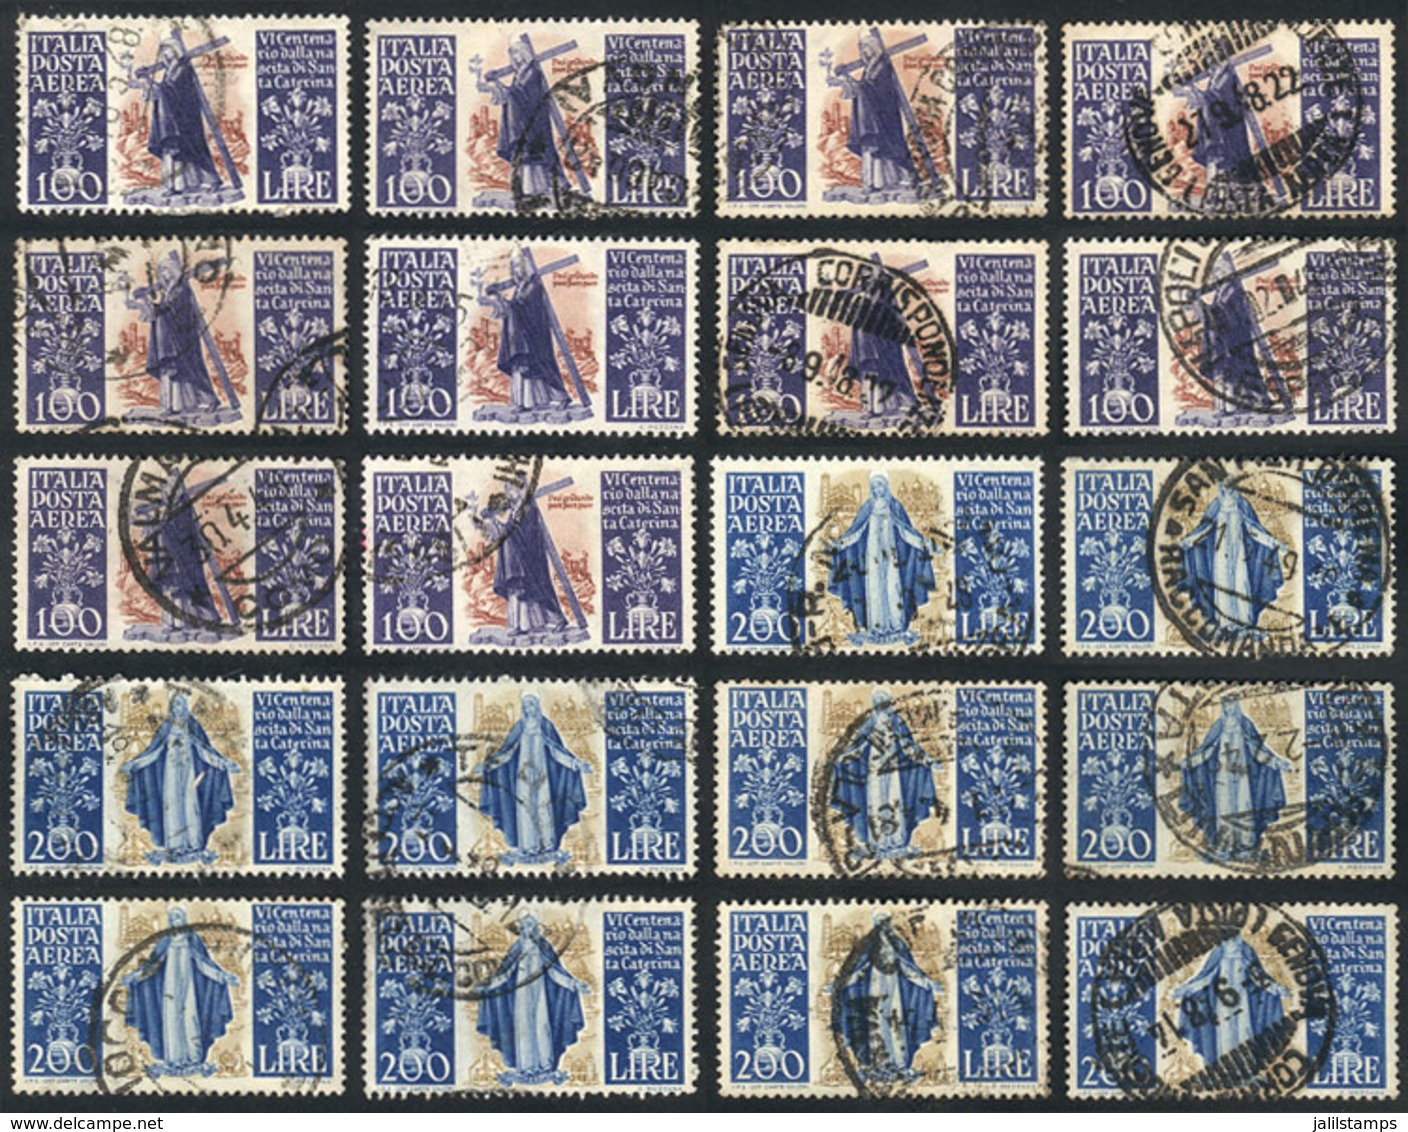 ITALY: Yvert 129/130, 1948 Santa Catherina, 10 Complete Used Sets, Fine To Excellent Quality, Catalog Value Euros 800. - Unclassified